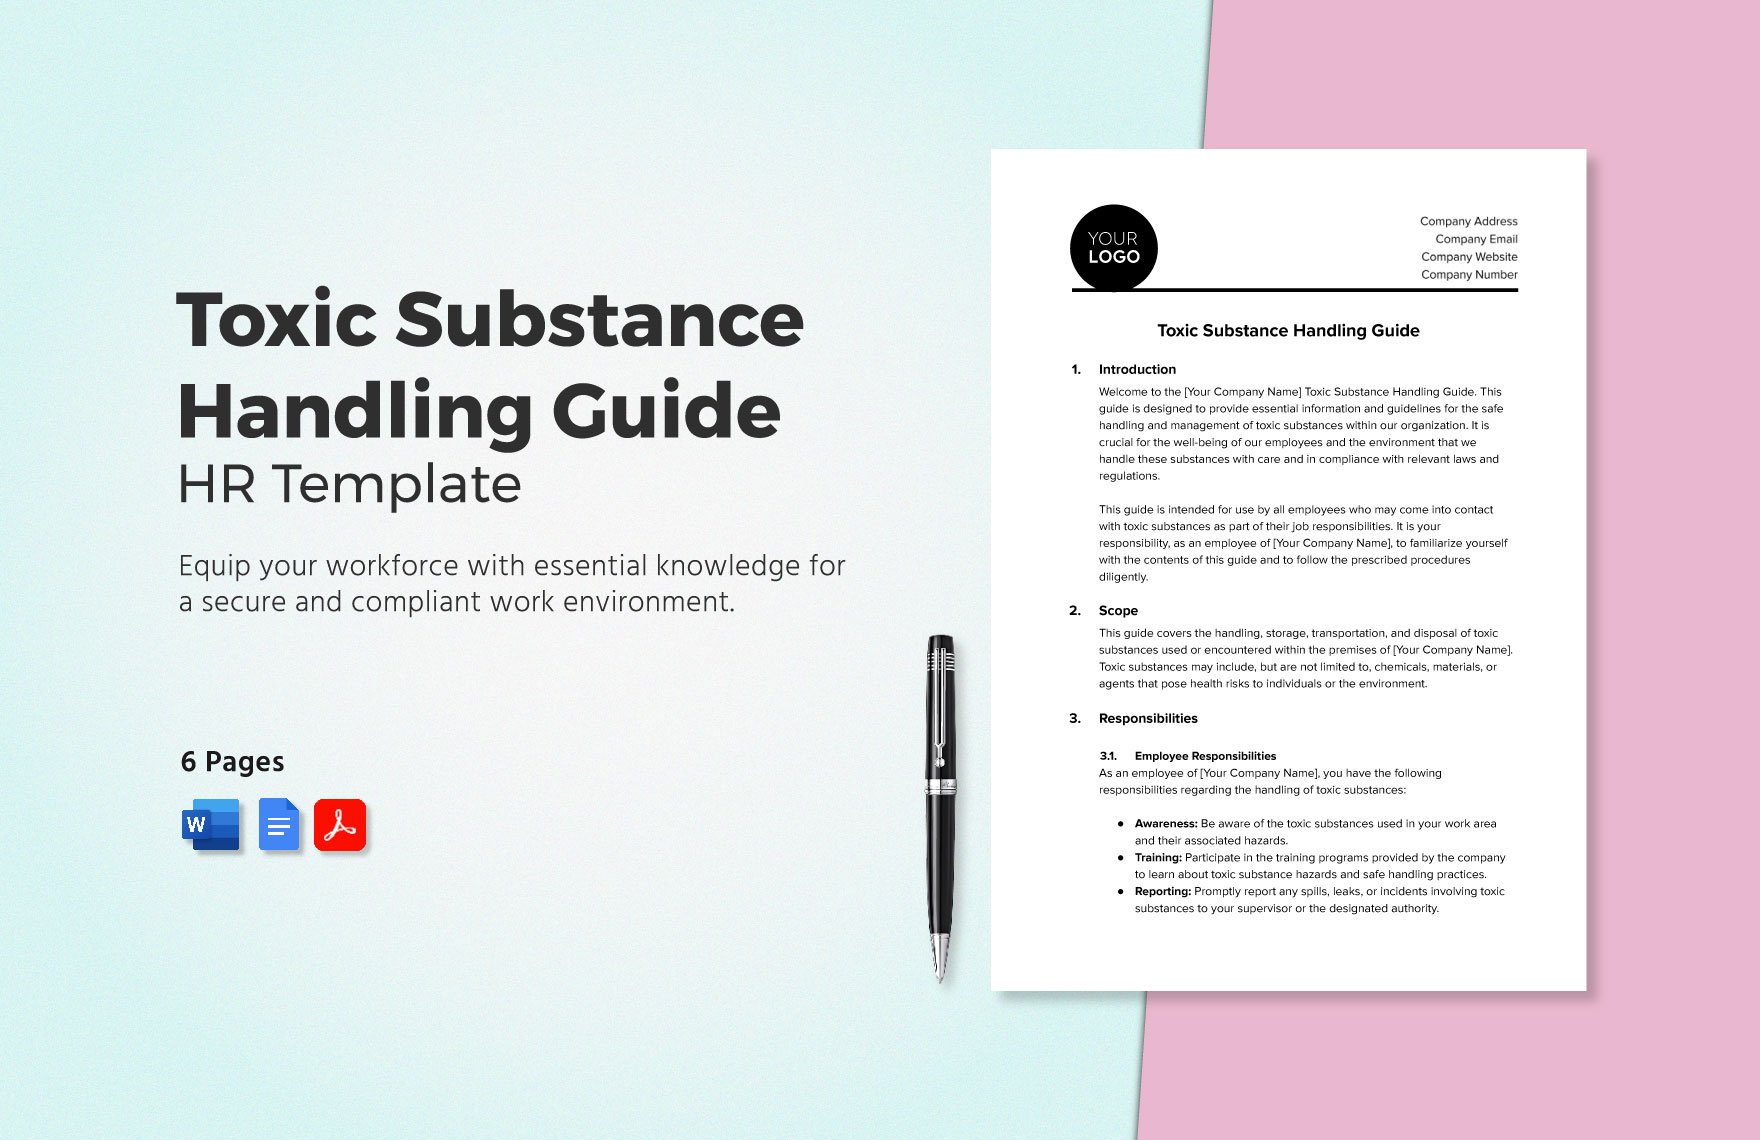 Toxic Substance Handling Guide HR Template